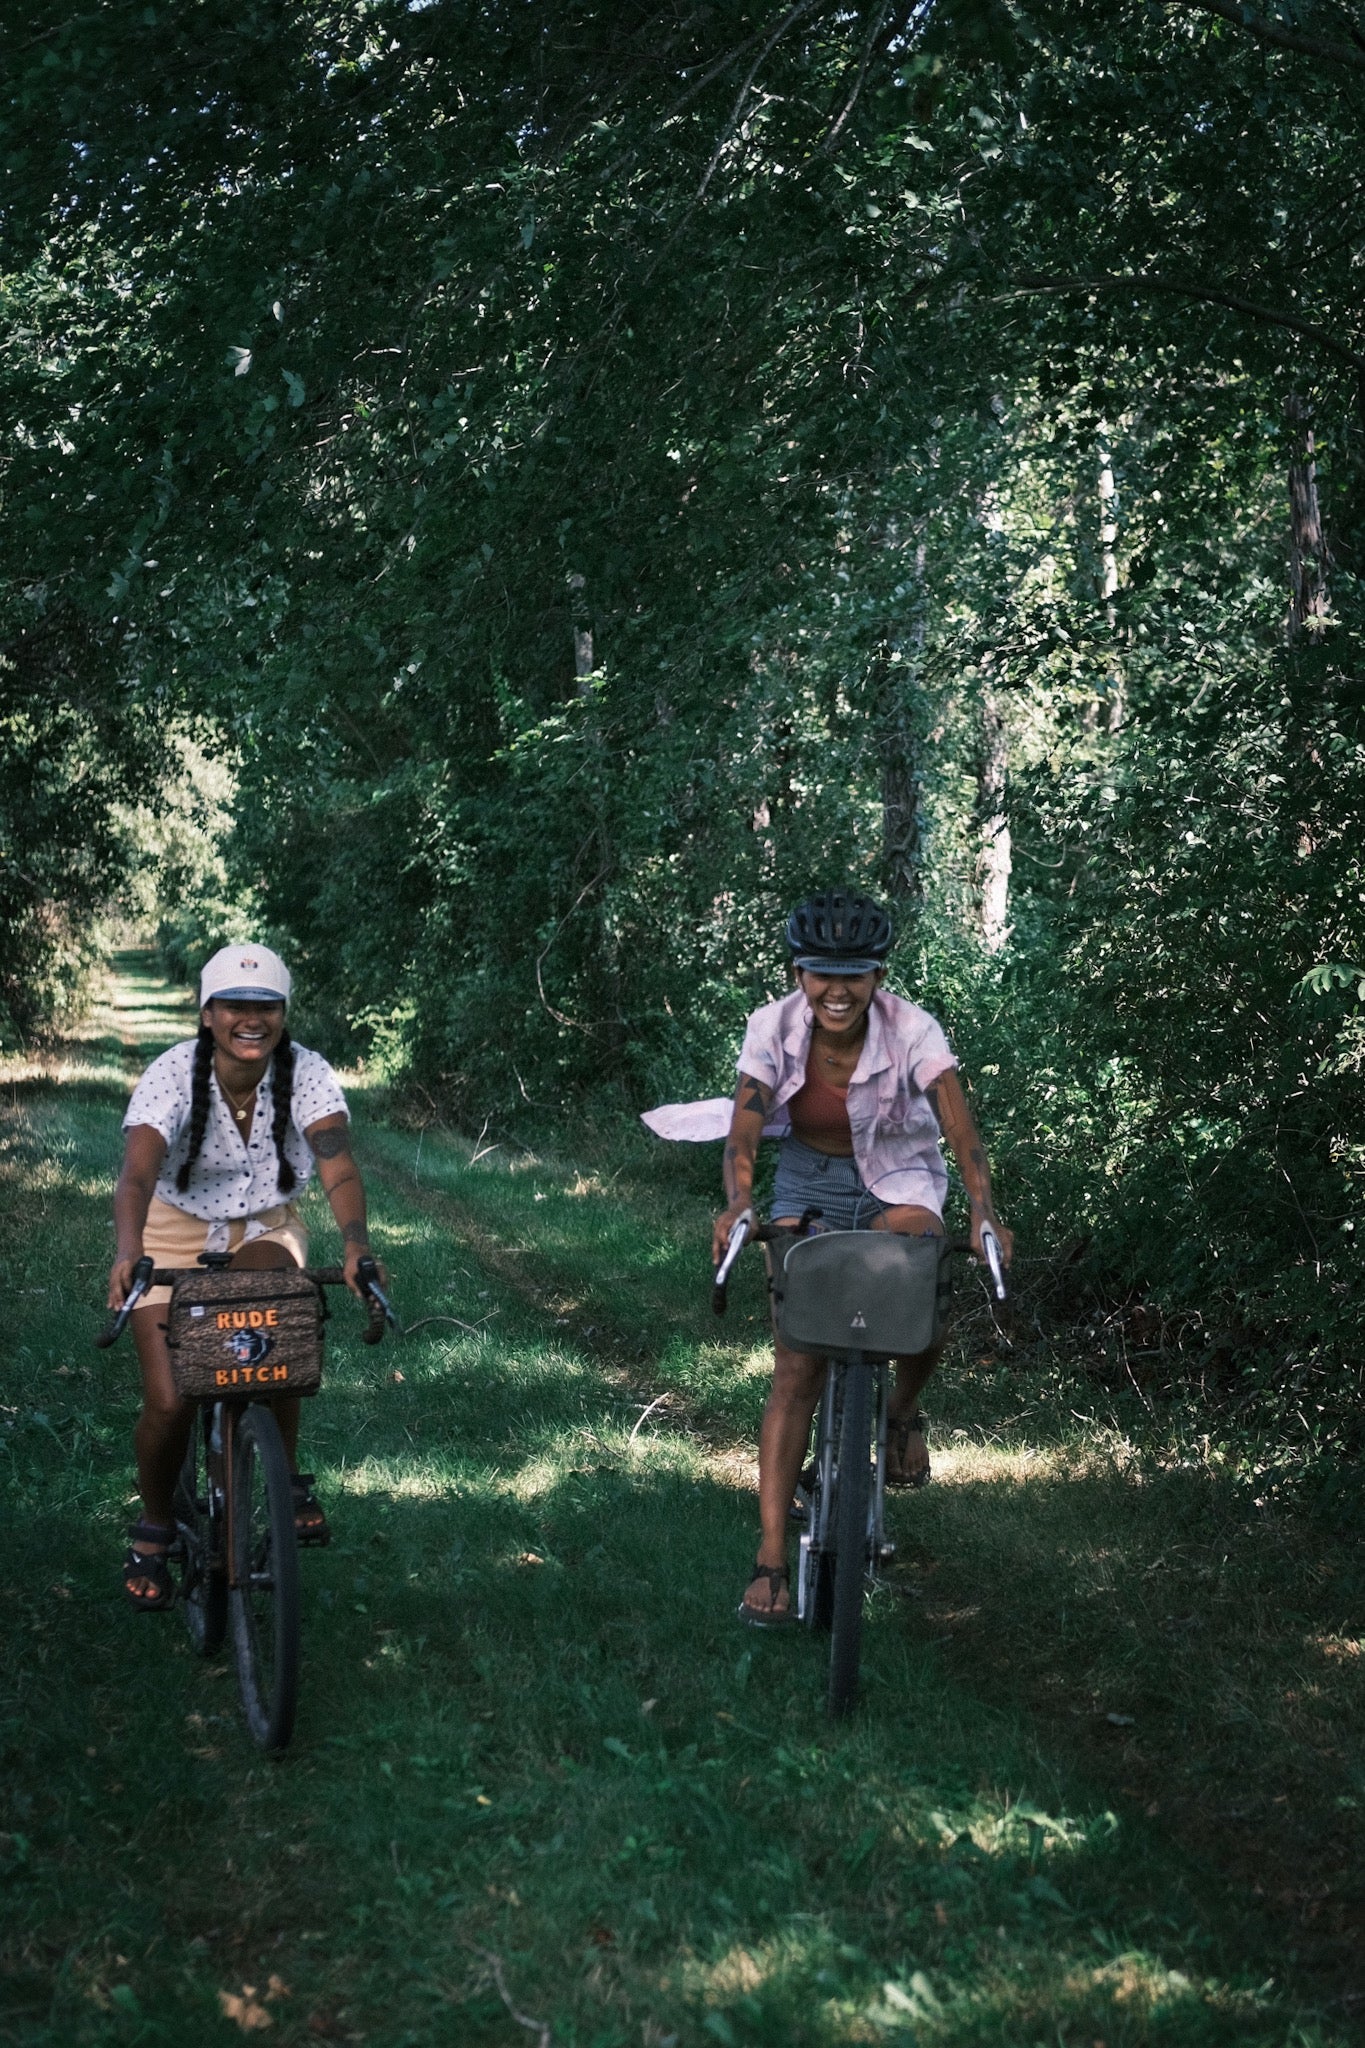 Two friends riding their bikes smiling wearing sandals